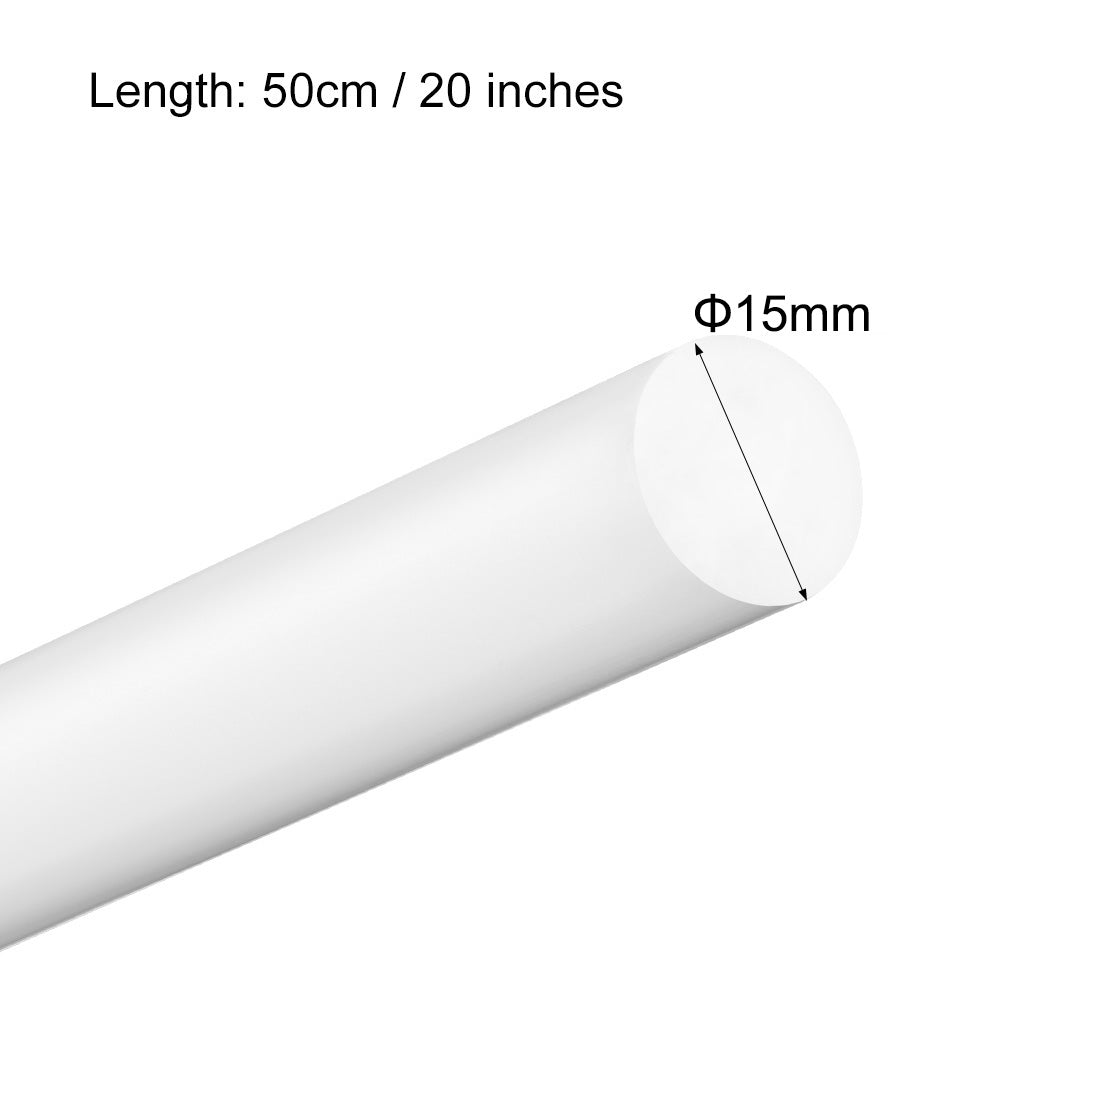 uxcell Uxcell Plastic Round Rod,15mm Dia 50cm White Engineering Plastic Round Bar